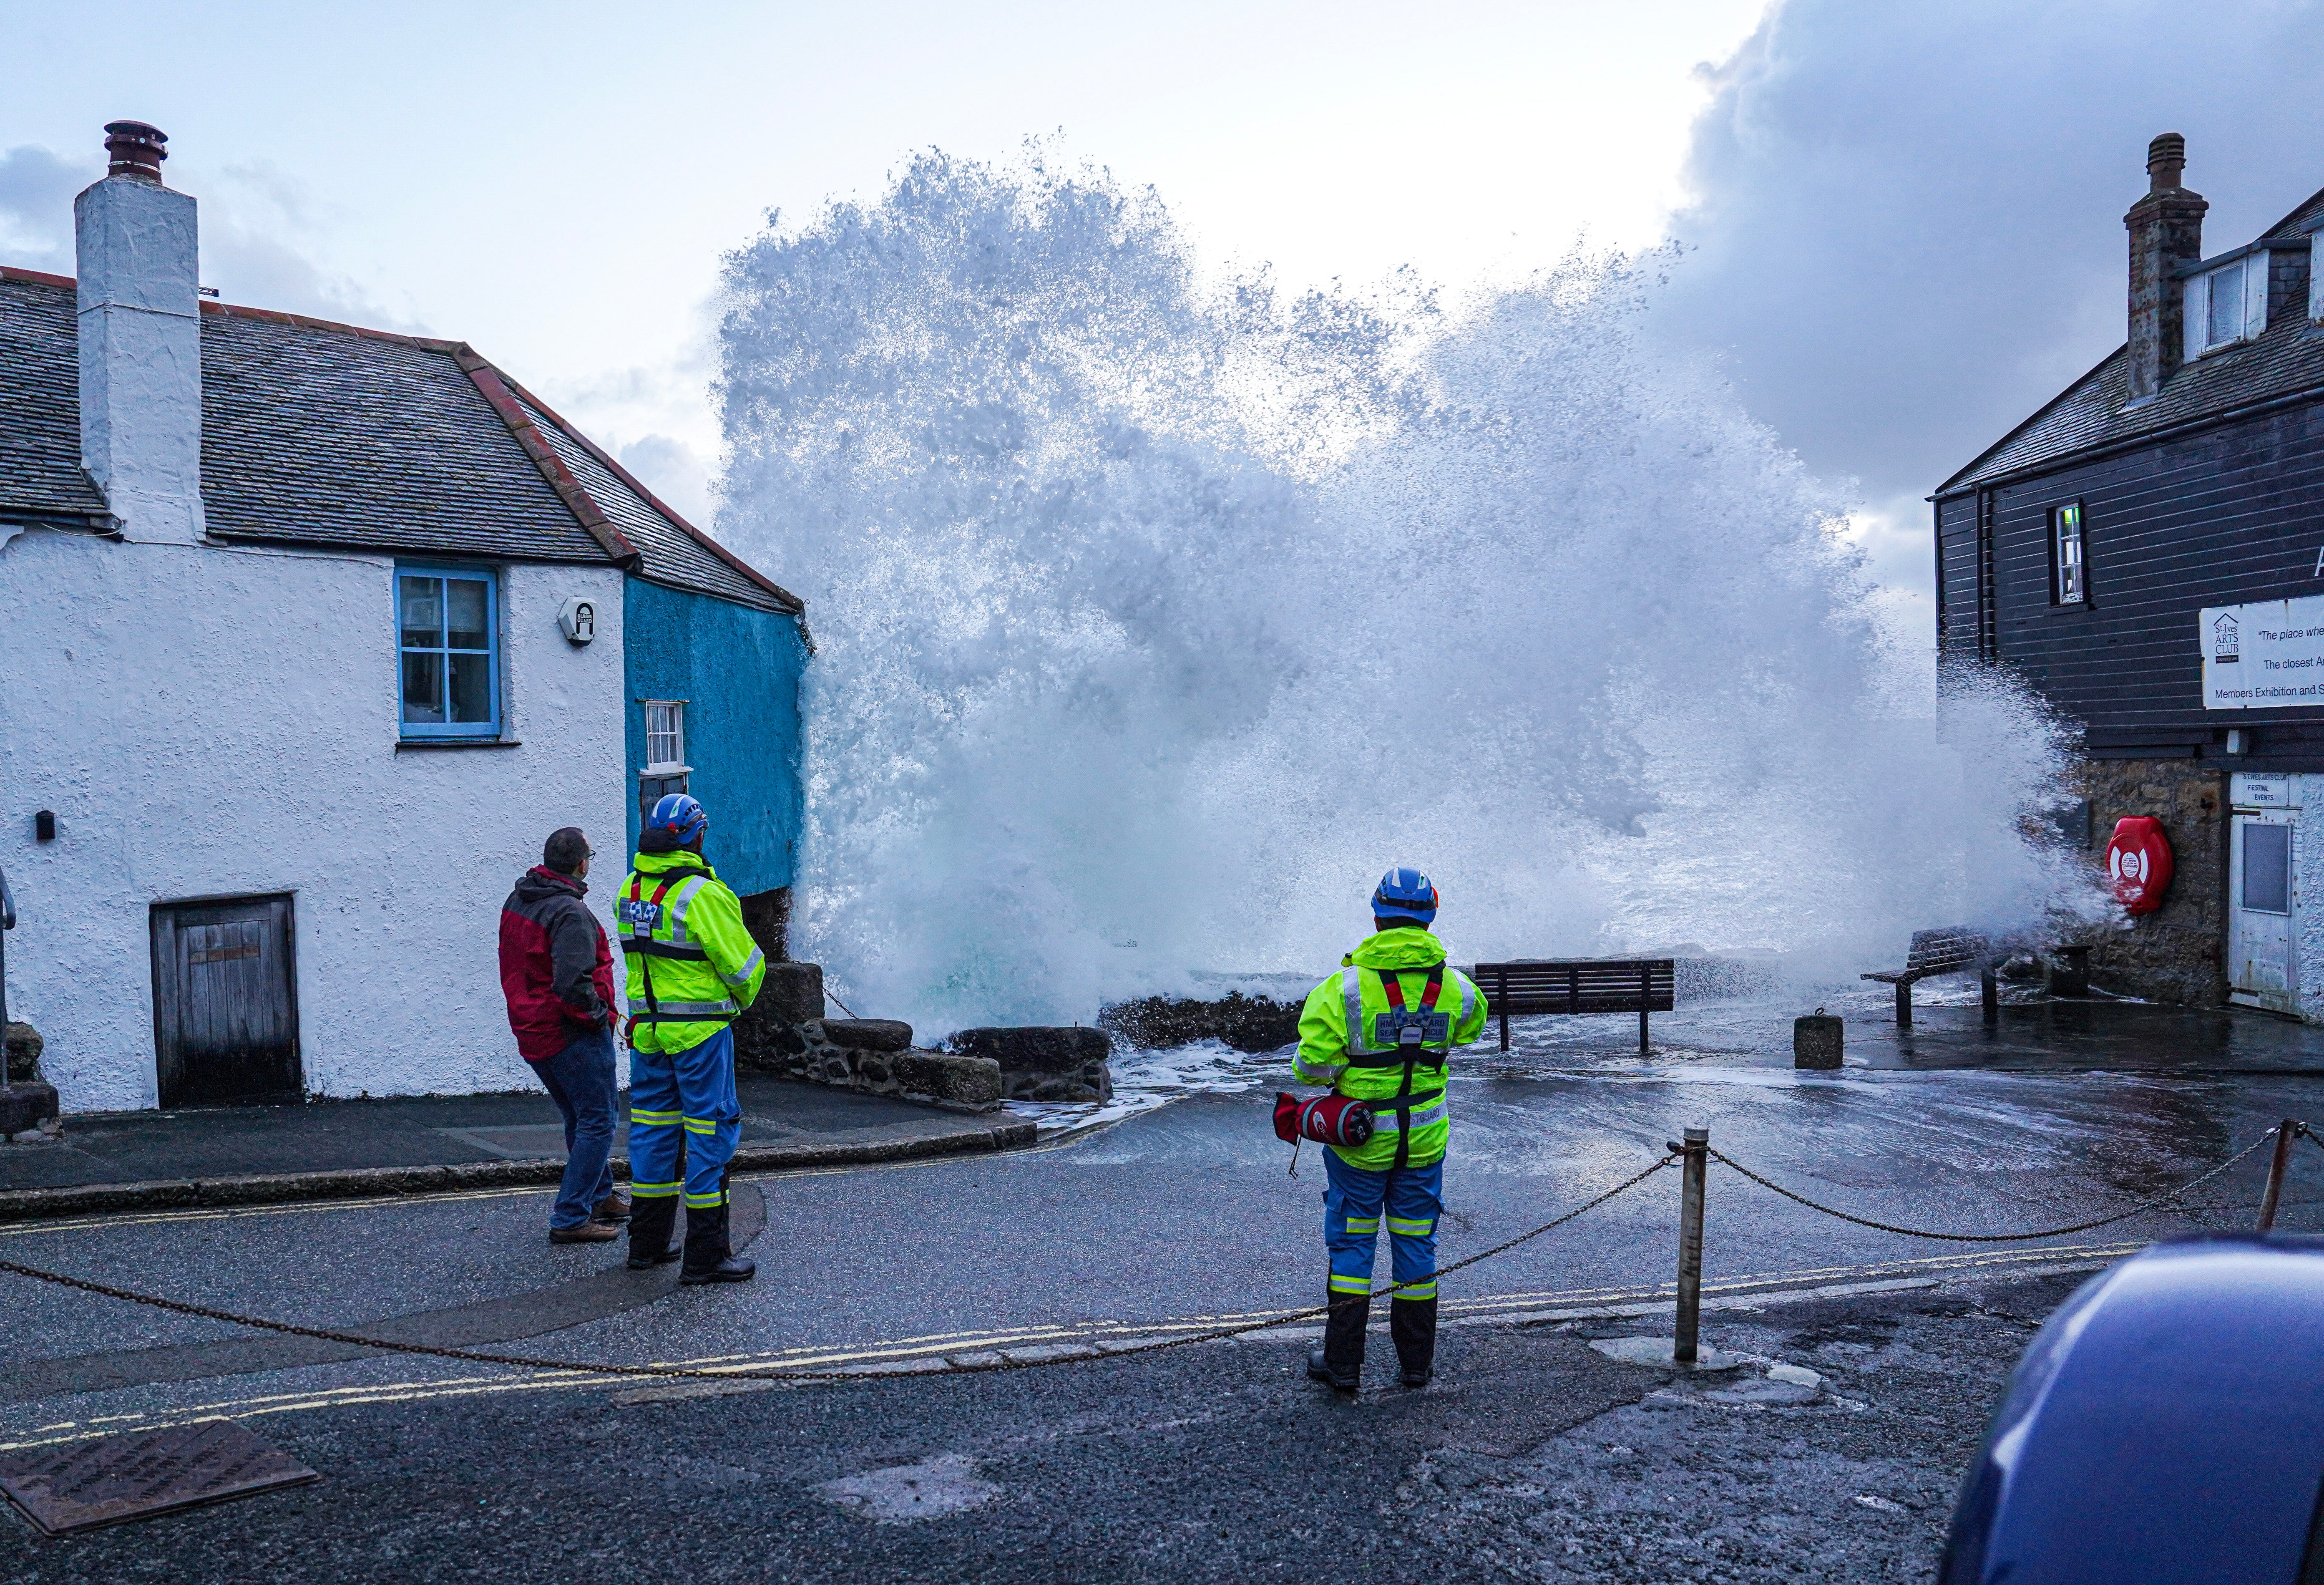 HM Coastguard personnel look on as waves crash over the harbour wall onto the street in St Ives